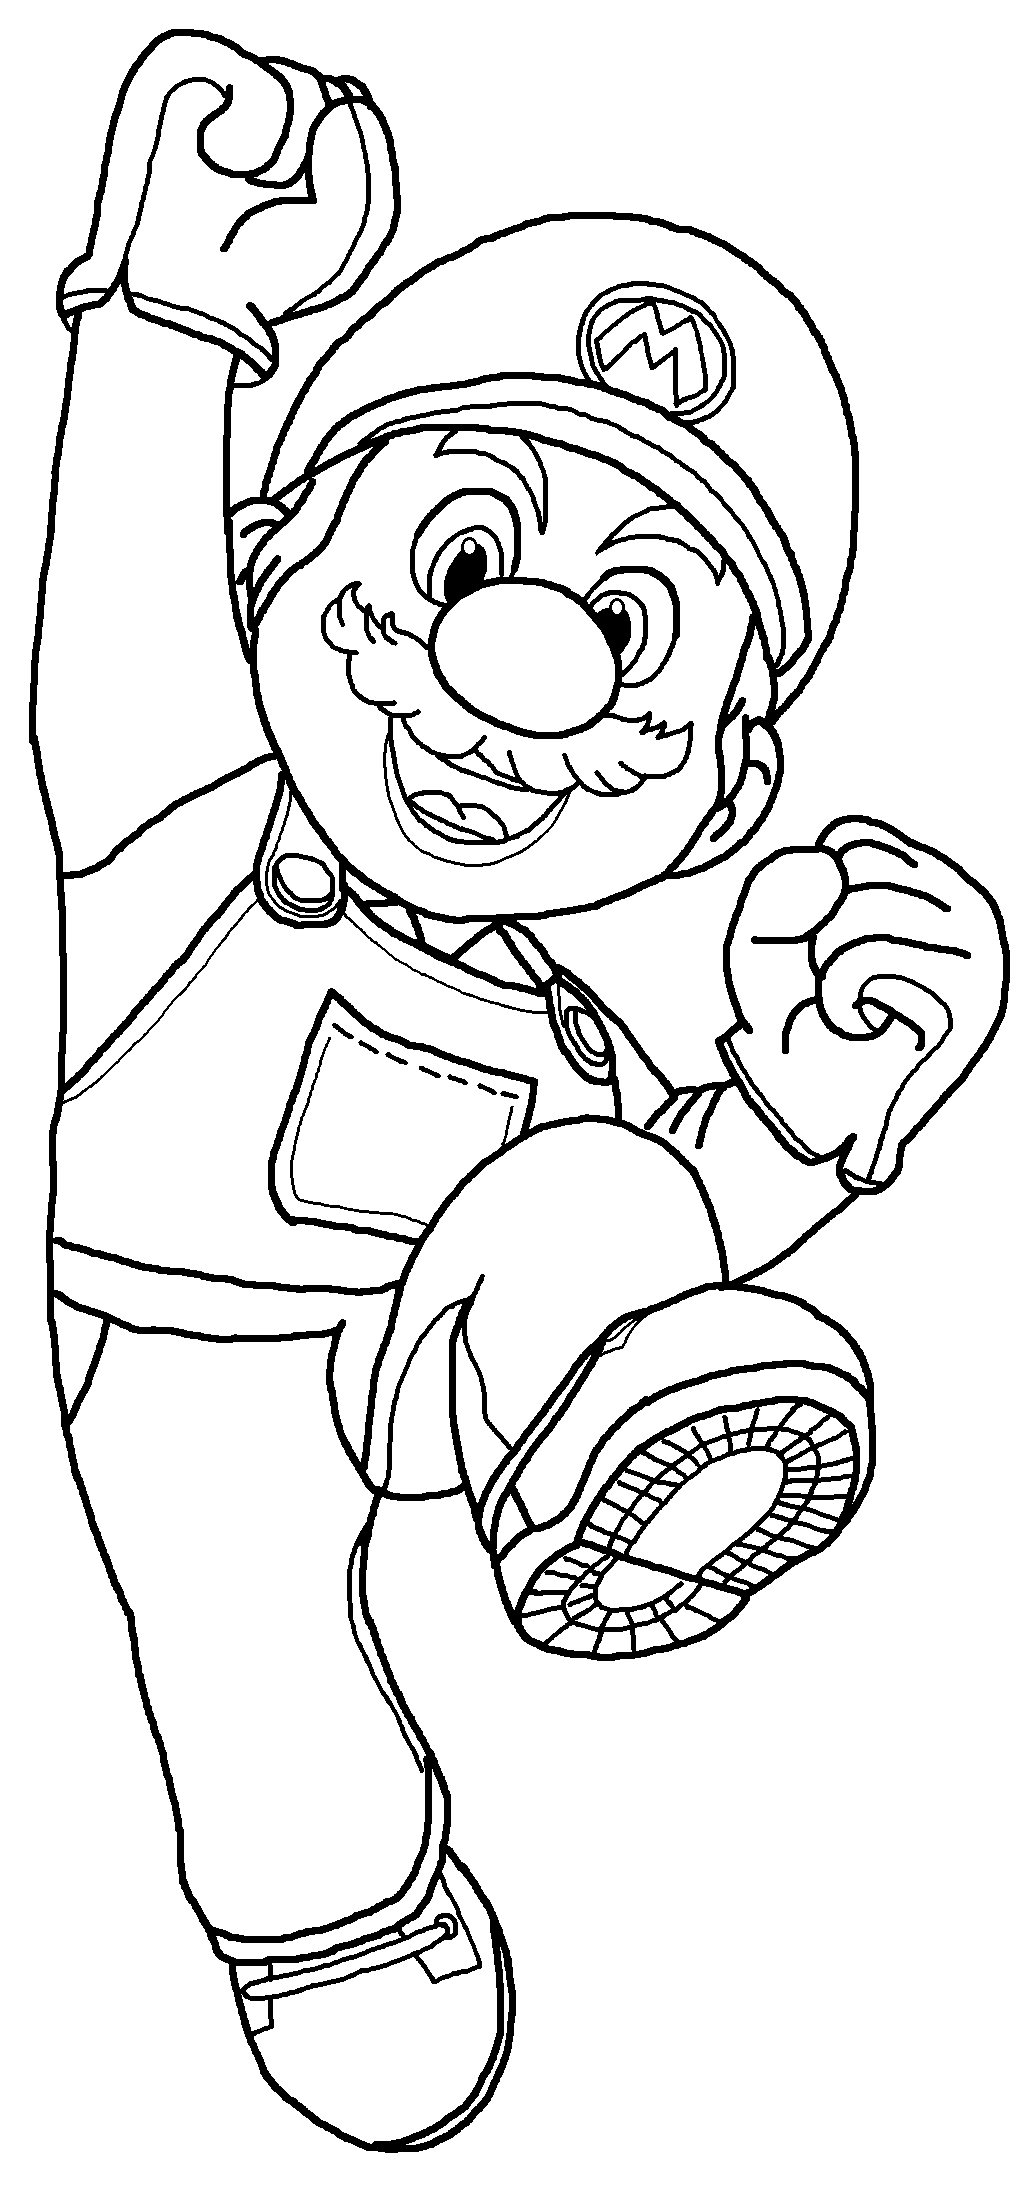 Mario (custom-made coloring page) by PrincessCreation345 on DeviantArt